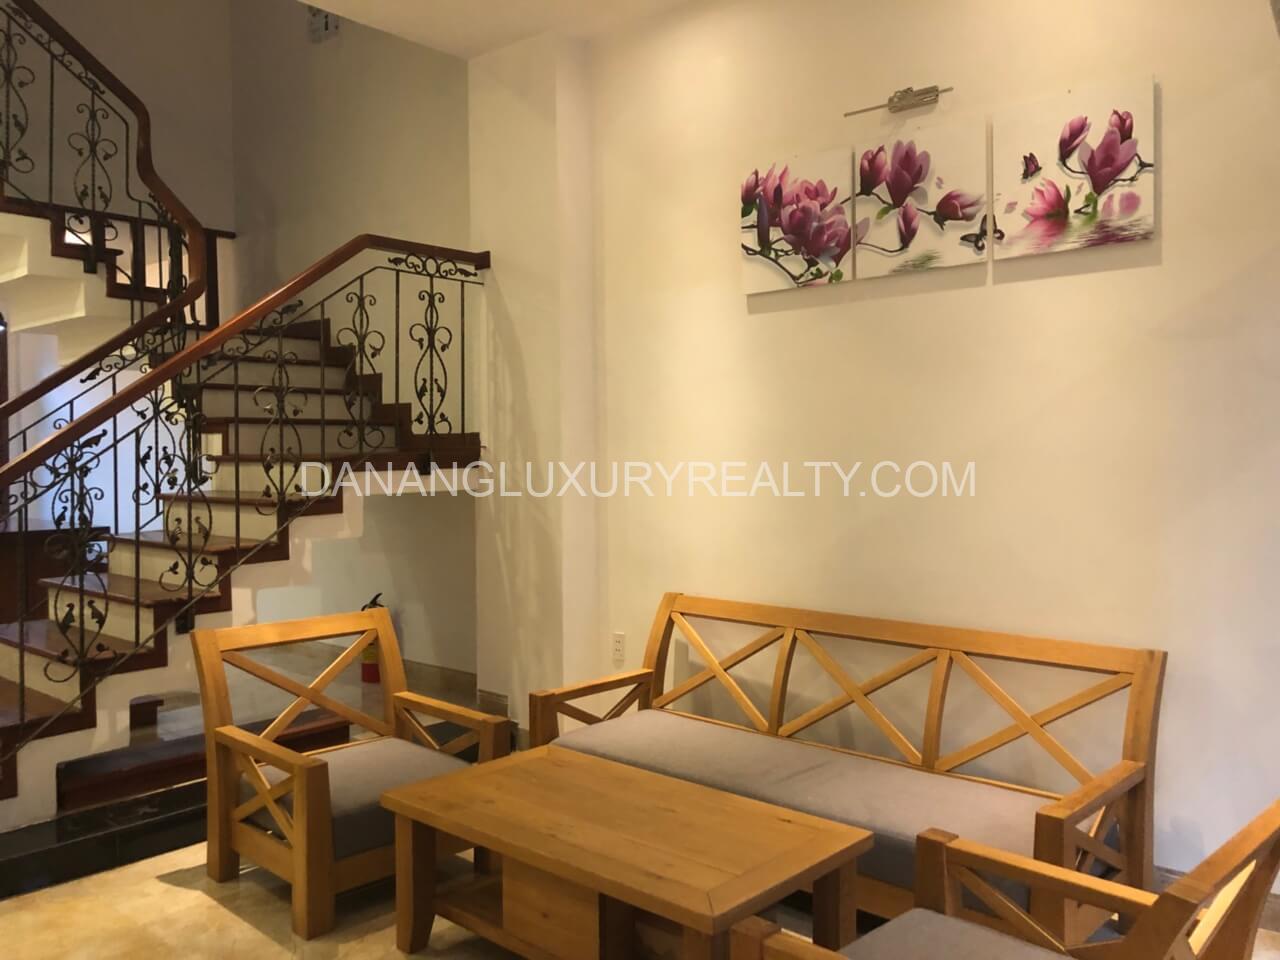 Lovely 3-bedroom house for rent near Pham Van Dong Area, Son Tra District.